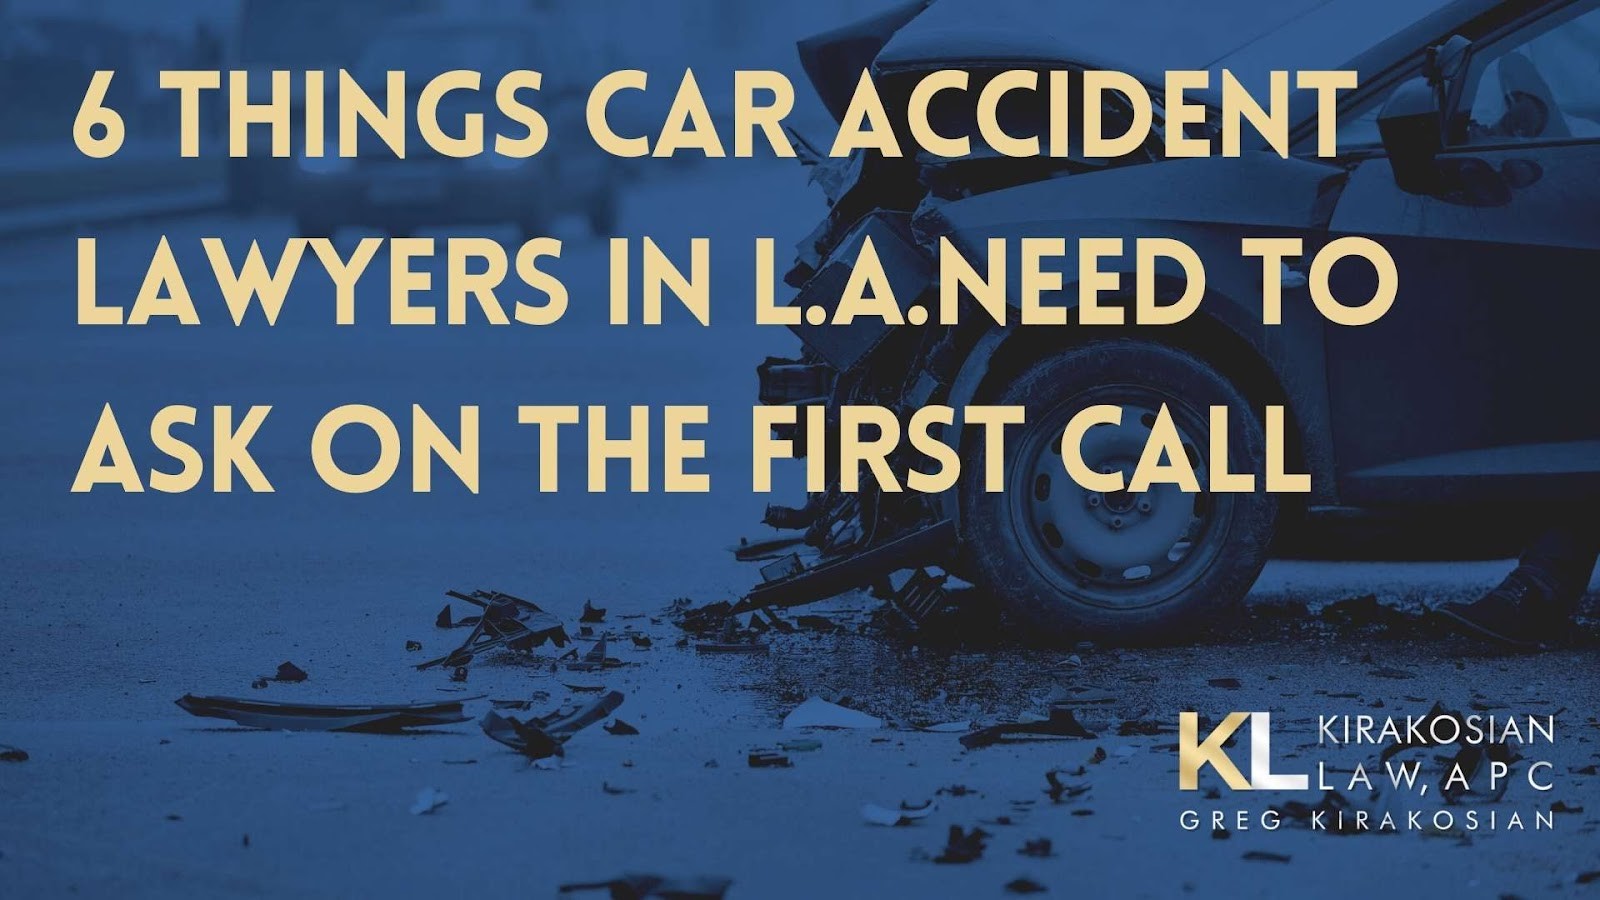 6 Things Car Accident Lawyers in Los Angeles Need to Ask on the First Call